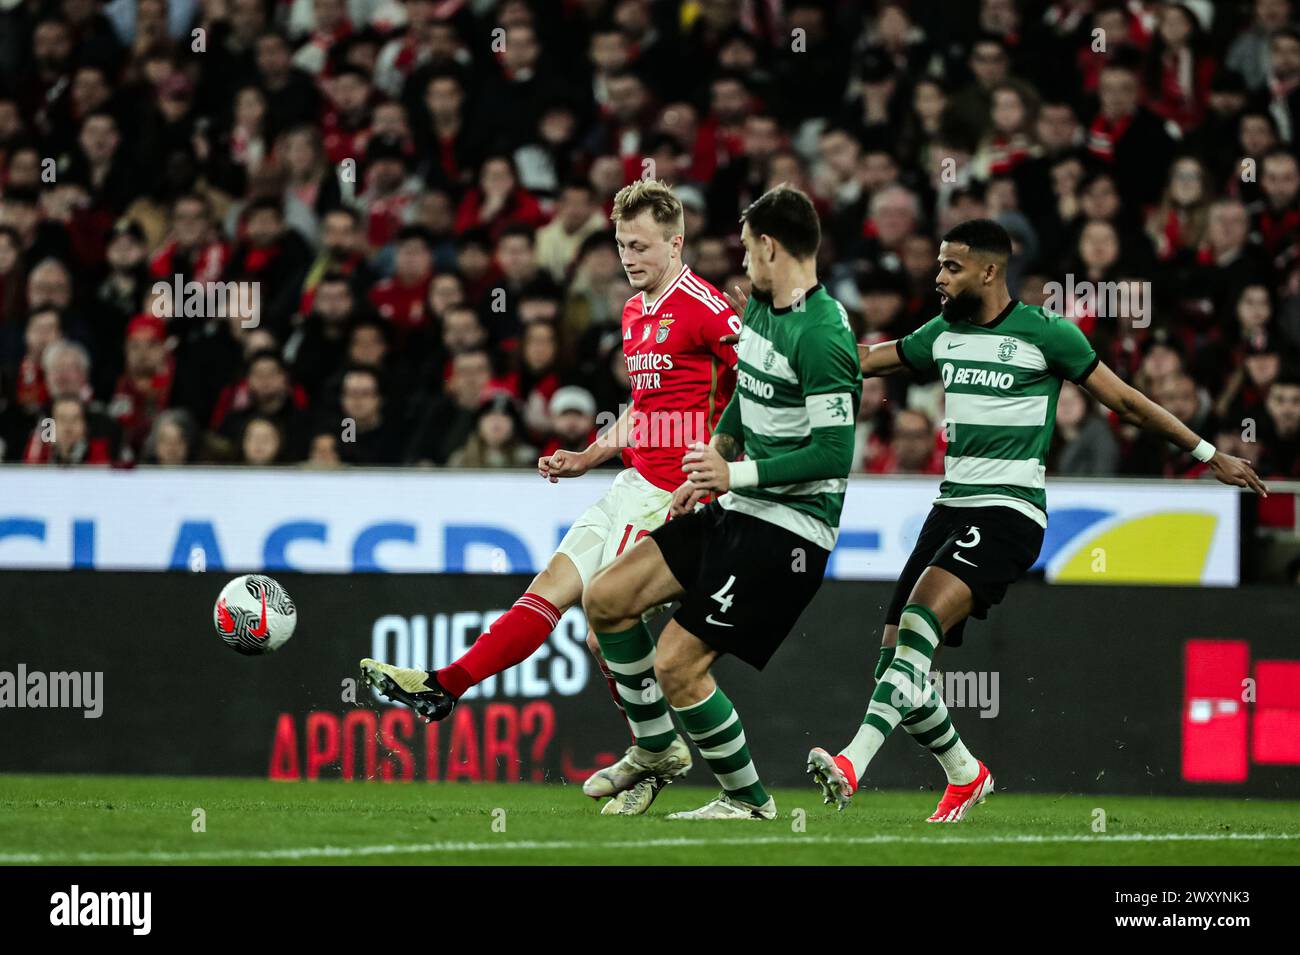 Lisbon, Portugal. 02nd Apr, 2024. Lisbon, 04/02/2024 - This evening the Sport Lisboa e Benfica football team hosted Sporting Clube de Portugal in the 2nd leg of the Portuguese Cup semi-finals at the Estádio da Luz in Lisbon. Tengstedt; Coates (Mário Vasa/Global Imagens) Credit: Atlantico Press/Alamy Live News Stock Photo